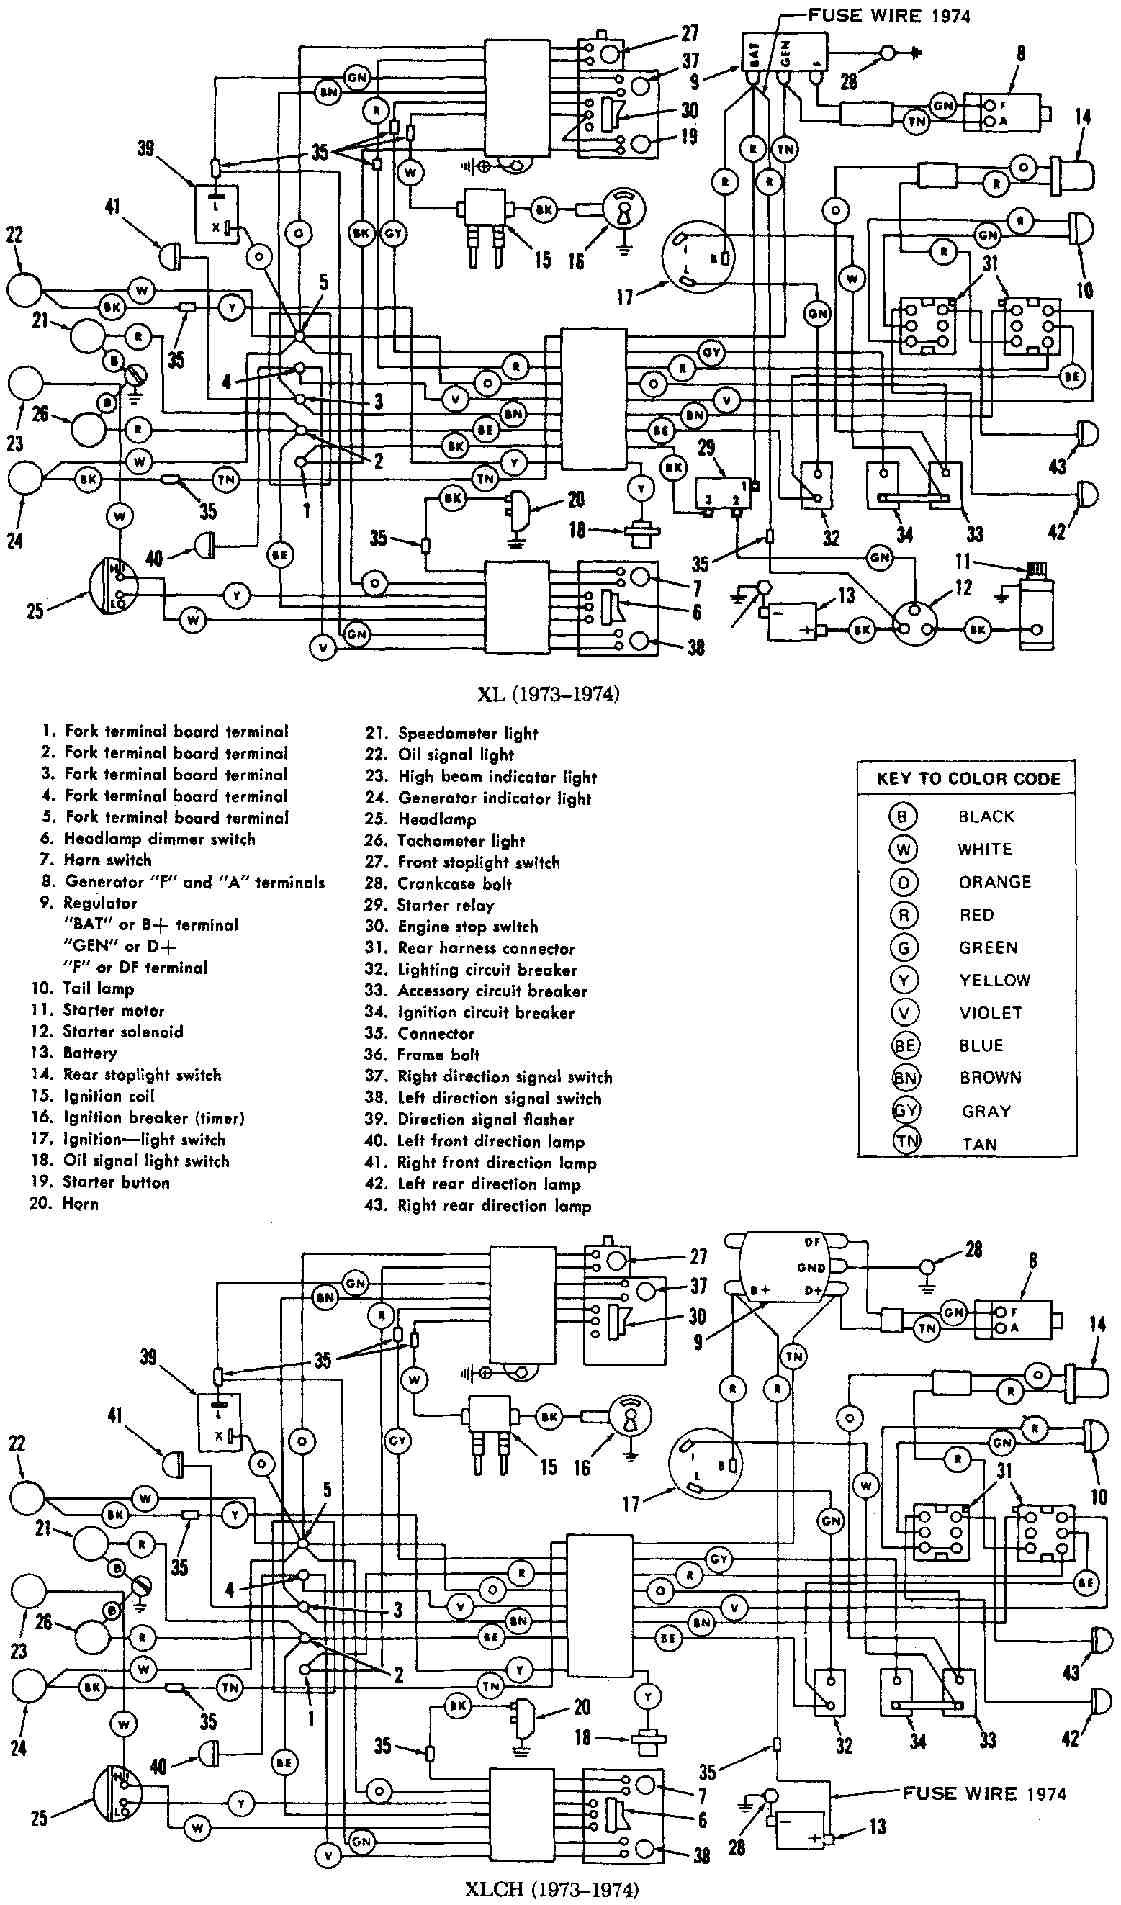 Gallery of Inspirational Turn Signal Wiring Diagram